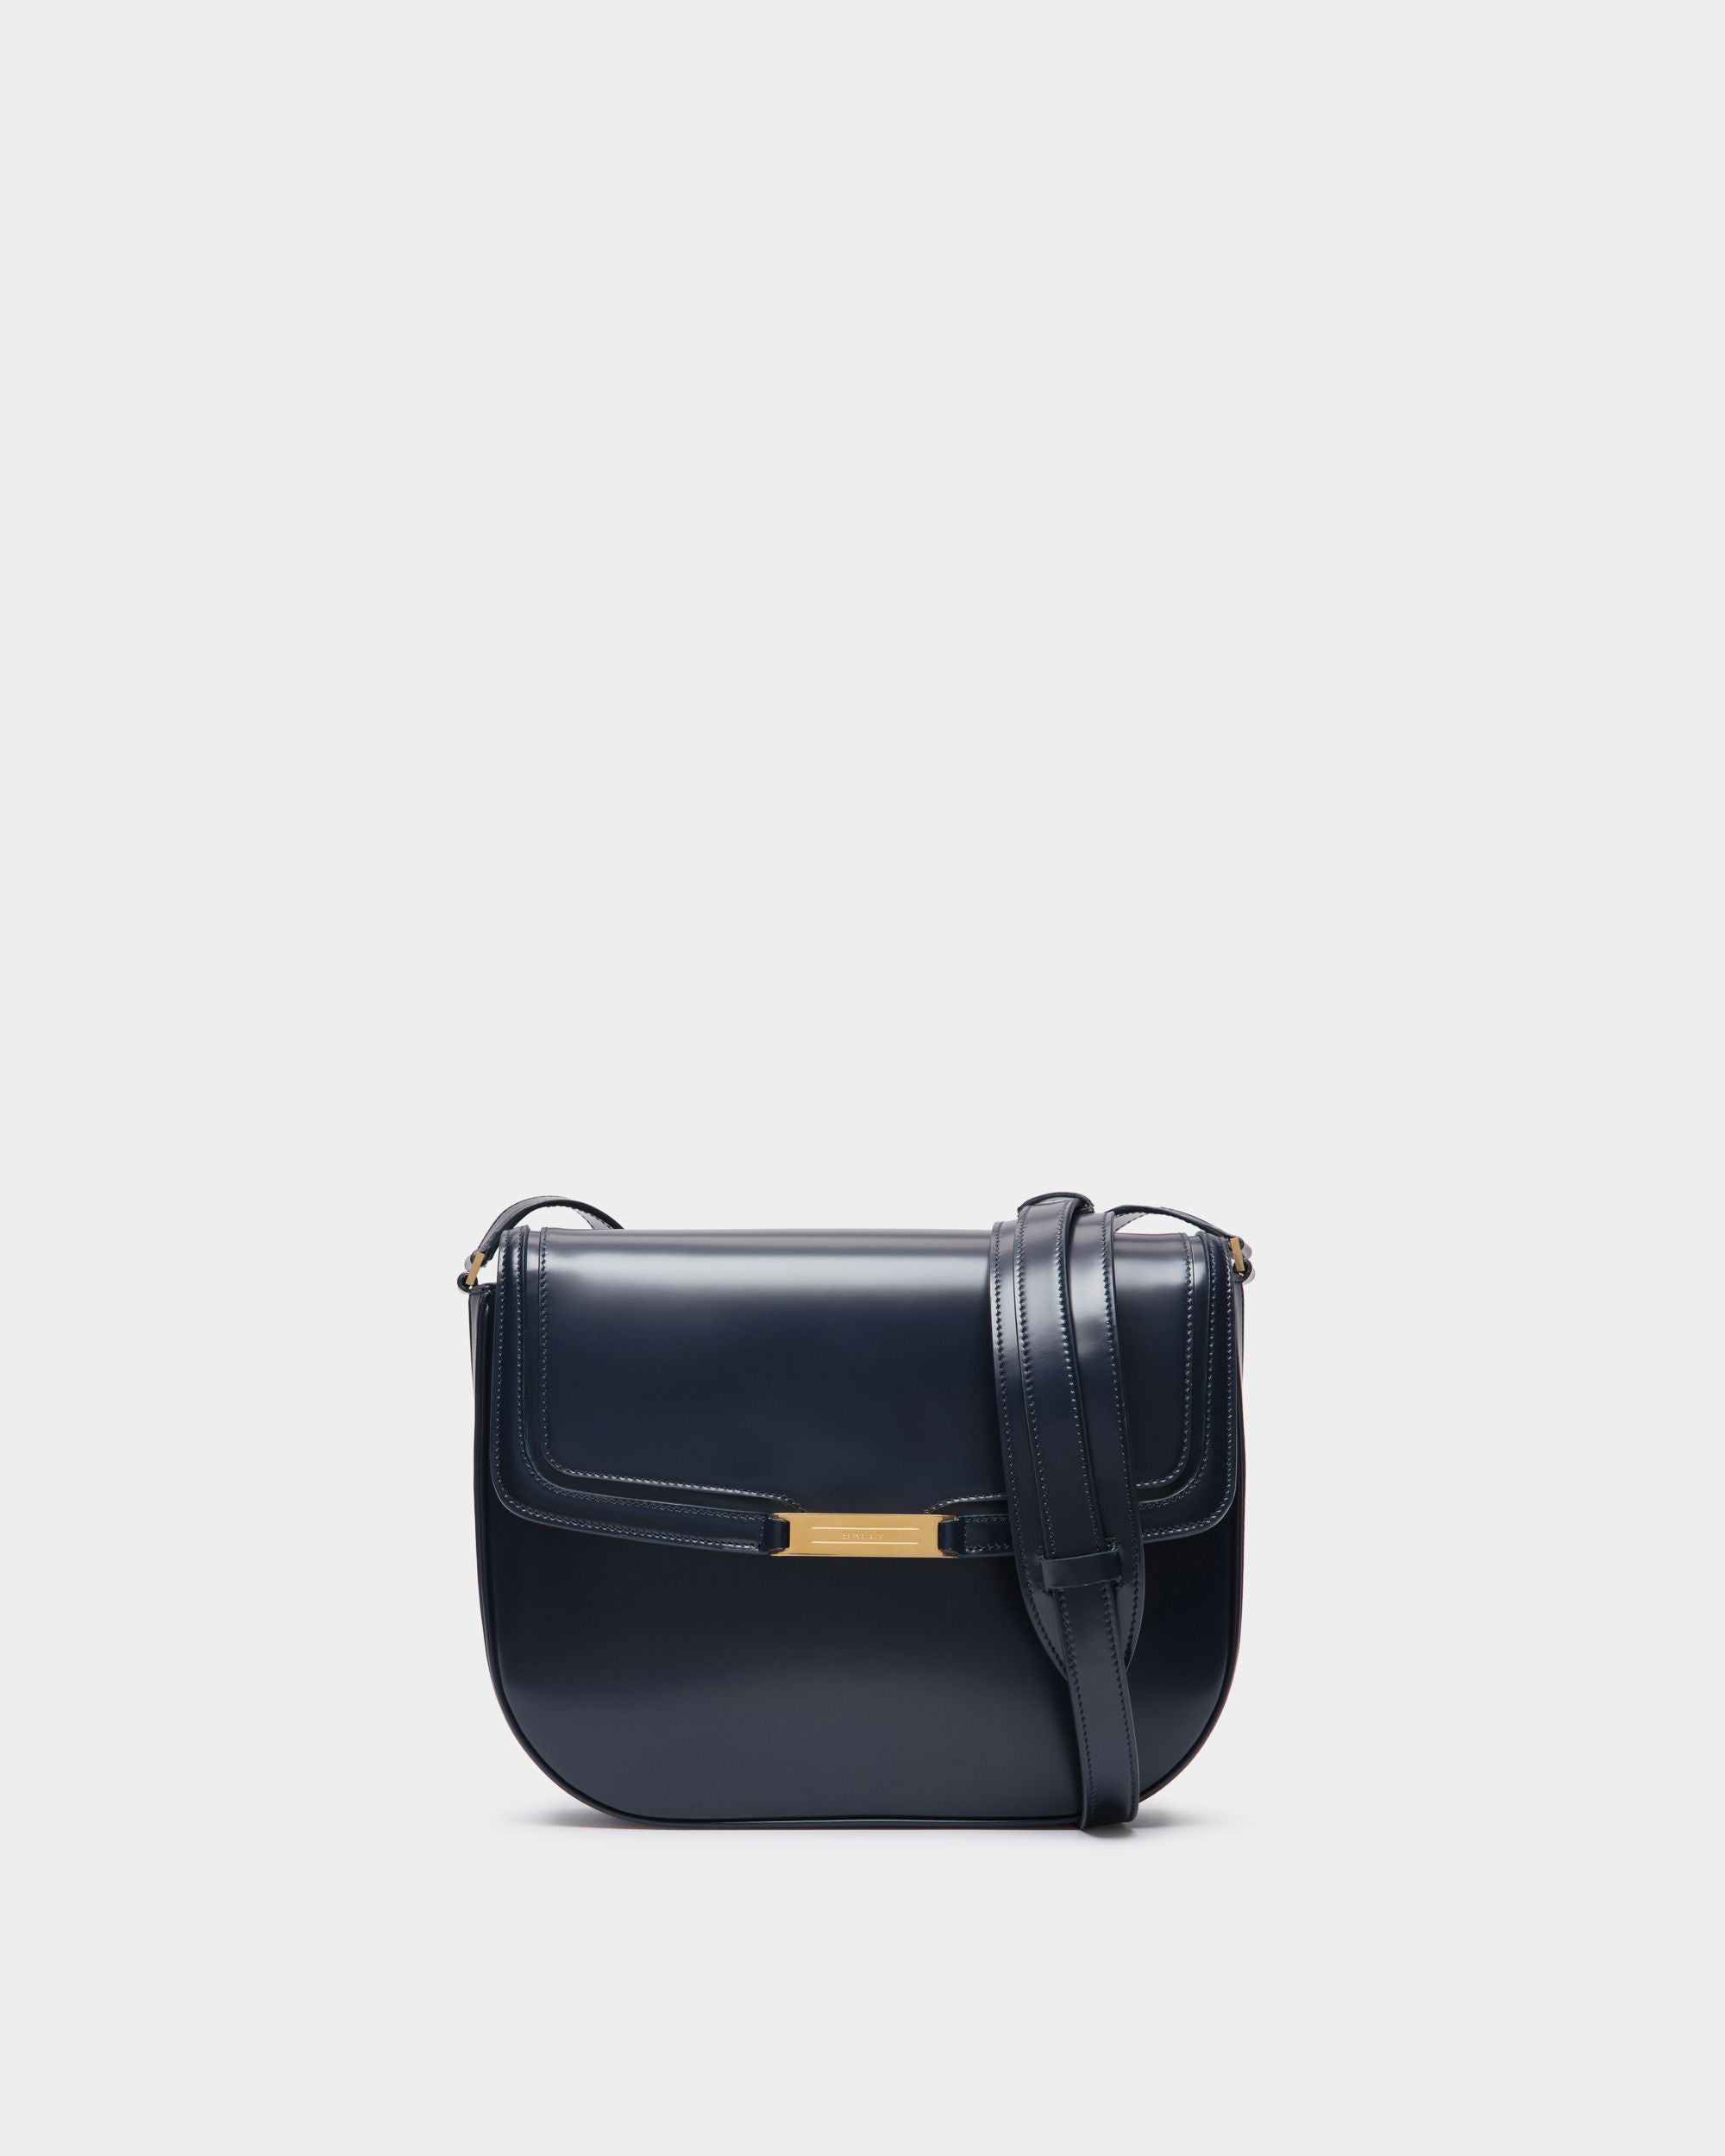 Men's Deco Crossbody Bag in Navy Blue Brushed Leather | Bally | Still Life Front